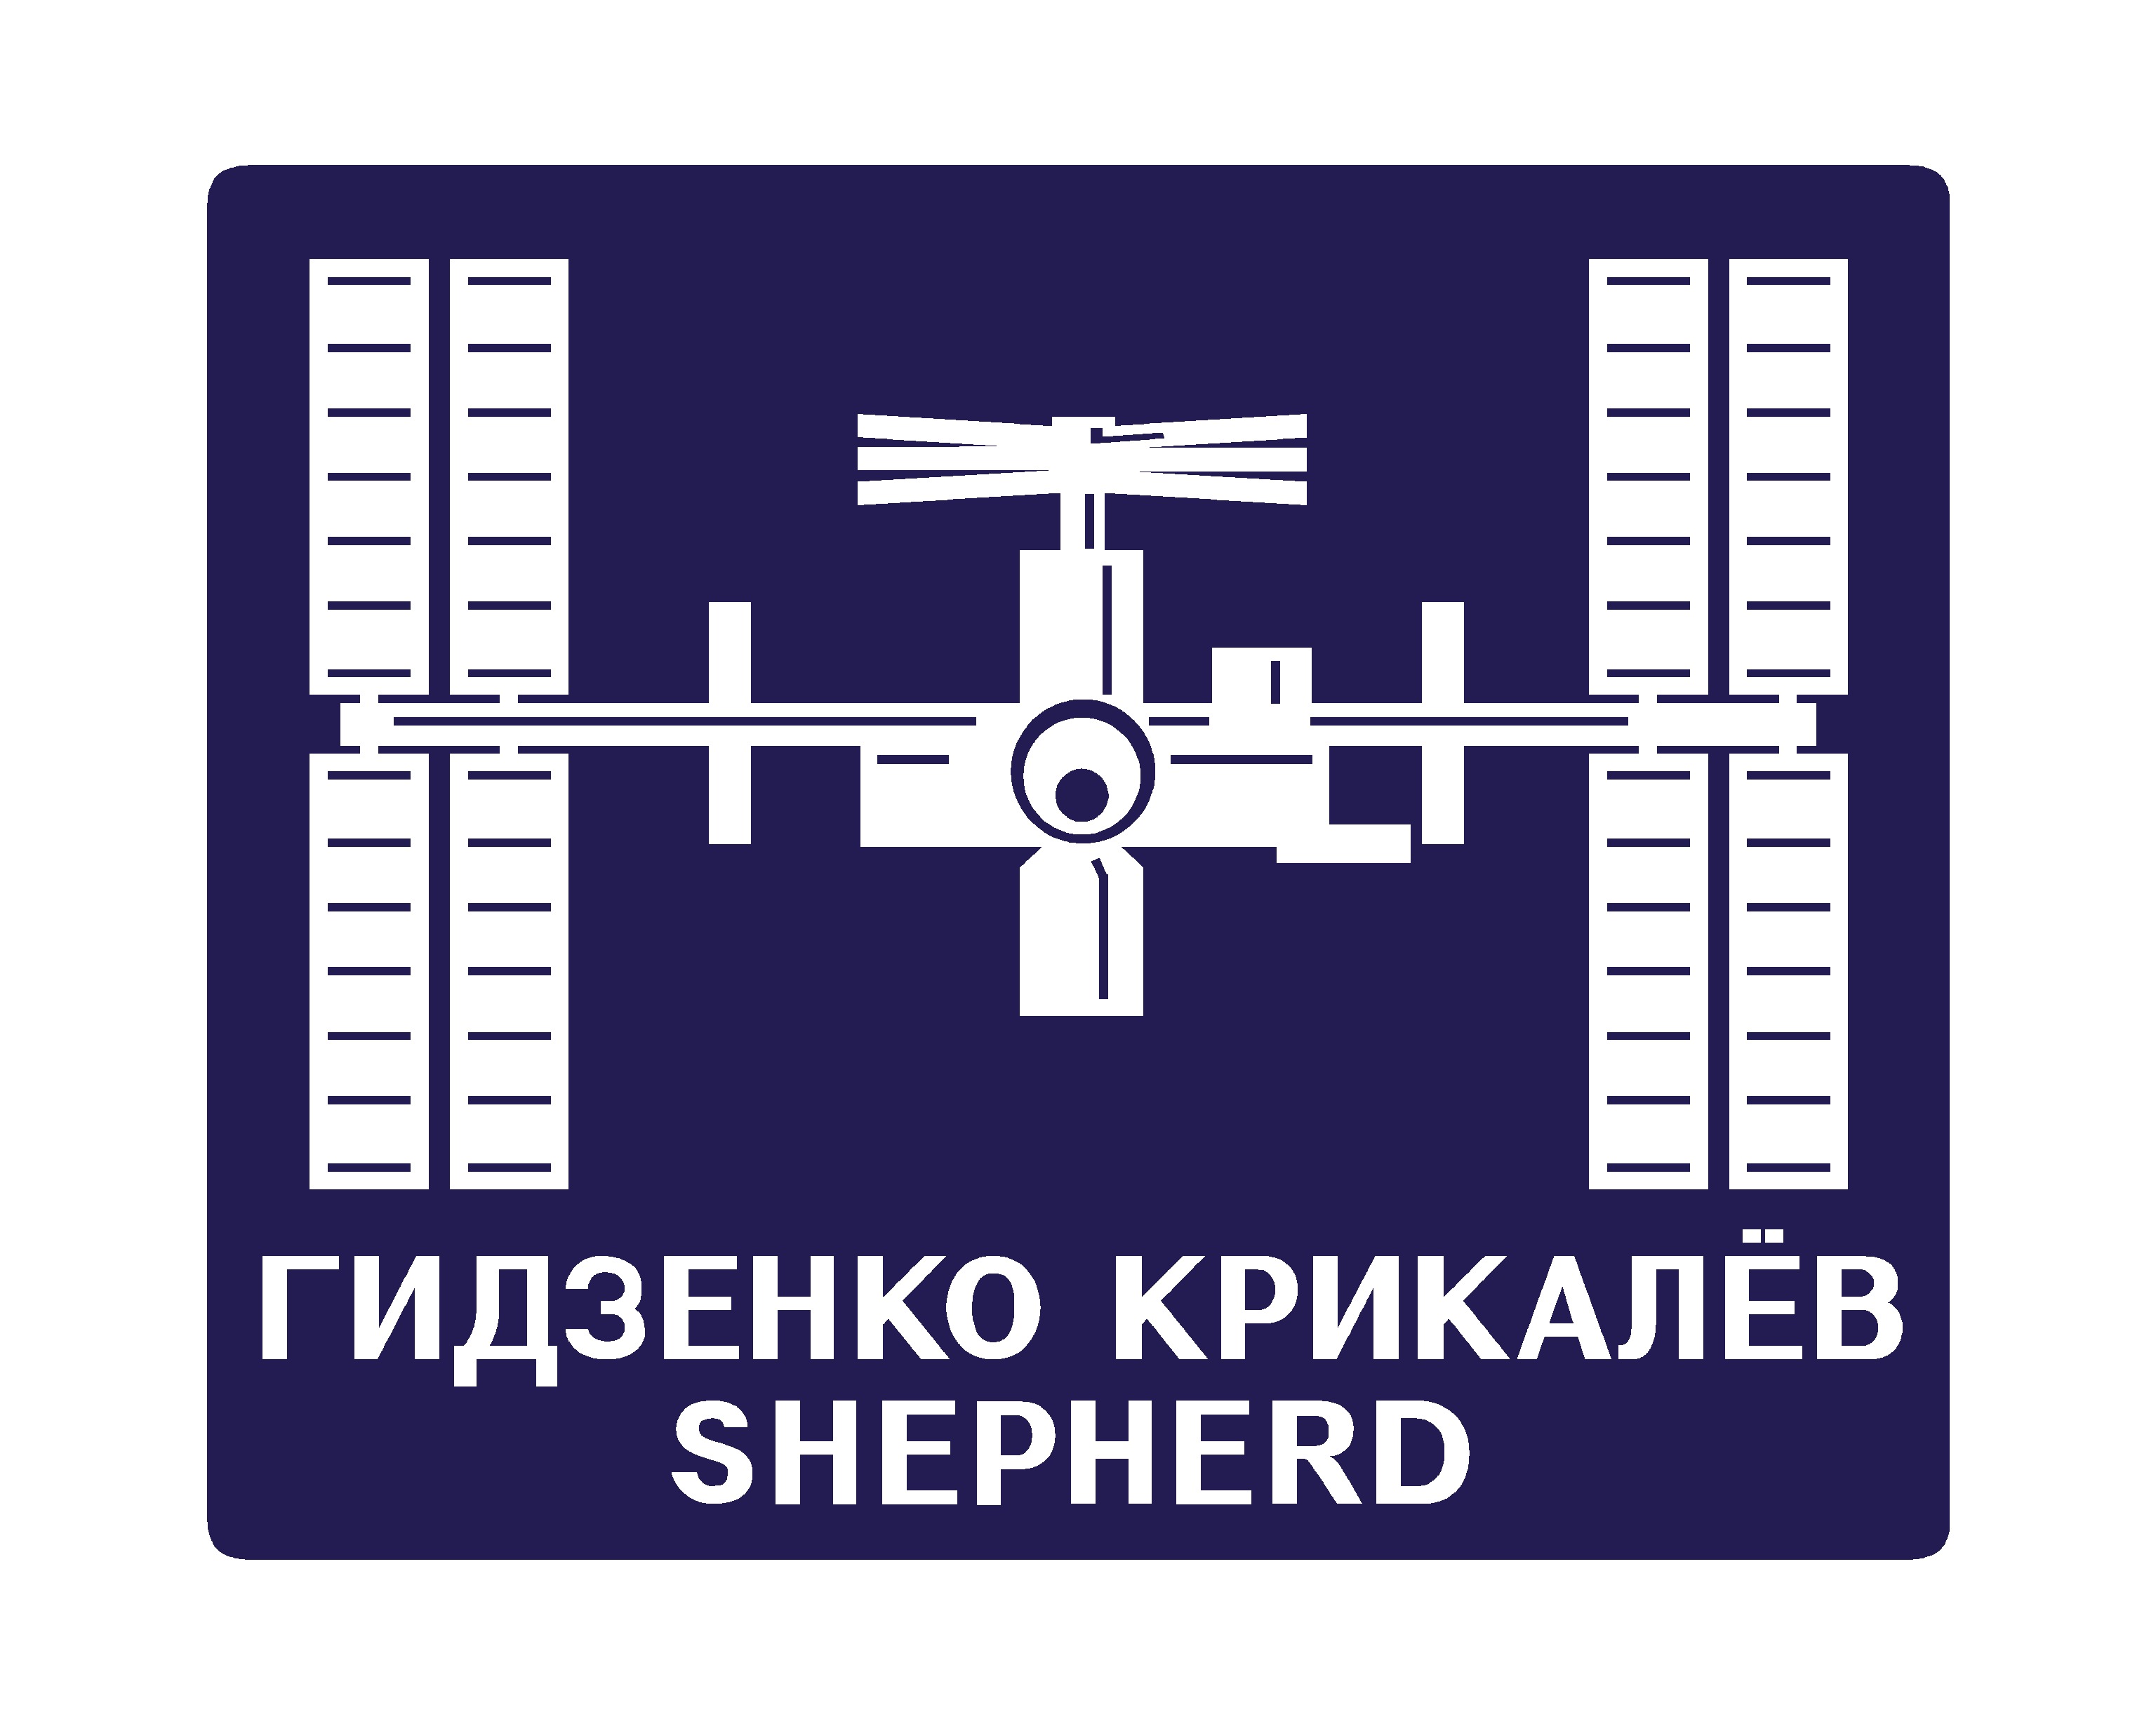 The first International Space Station crew patch is a simplified graphic of the station complex when fully completed. The station is seen with solar arrays turned forward. The last names of the Expedition 1 crew, Soyuz pilot Yuri Gidzenko, flight engineer Sergei Krikalev, and expedition commander William (Bill)Shepherd, appear under the station symbol.